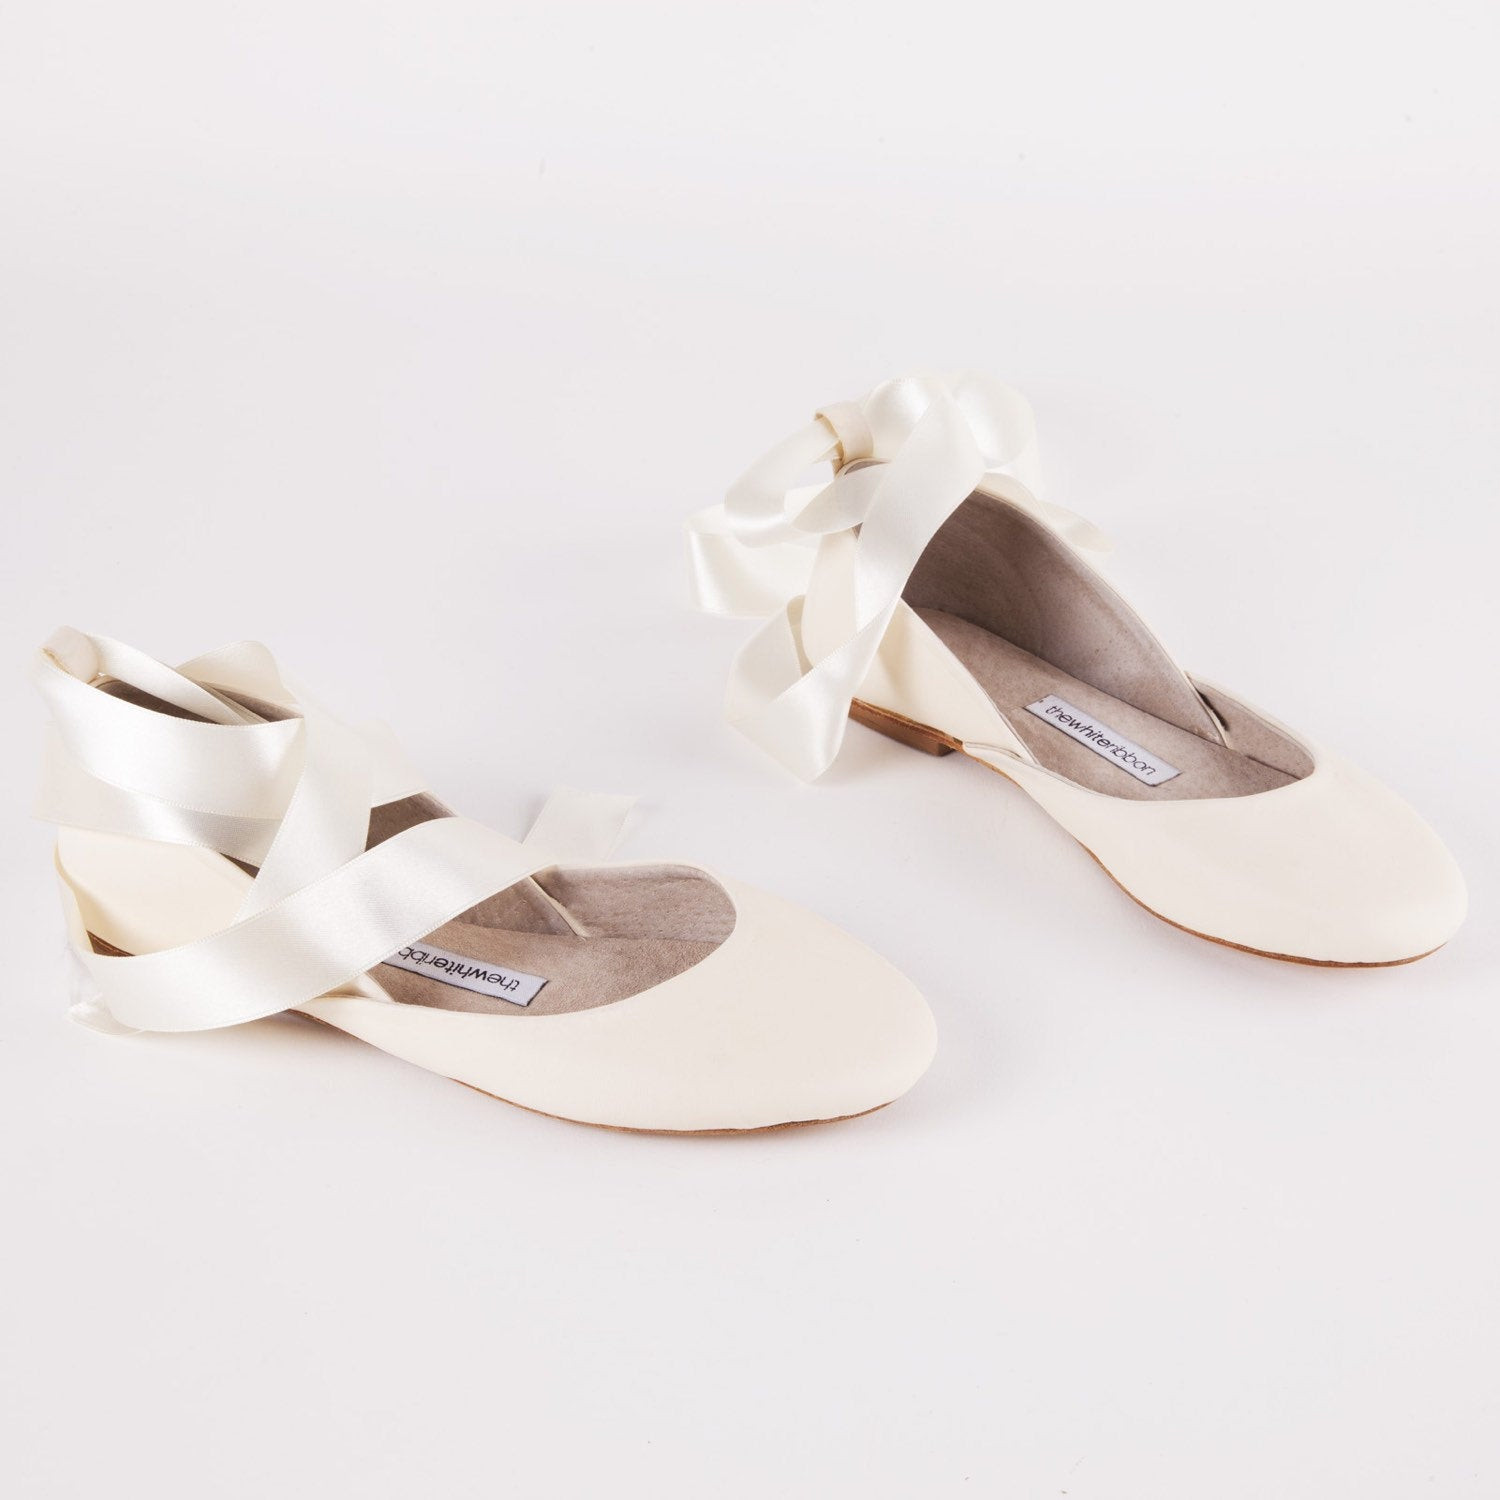 Ballet Flat Wedding Shoes
 The Wedding Shoes Bridal Ballet Flats Wedding Flats for